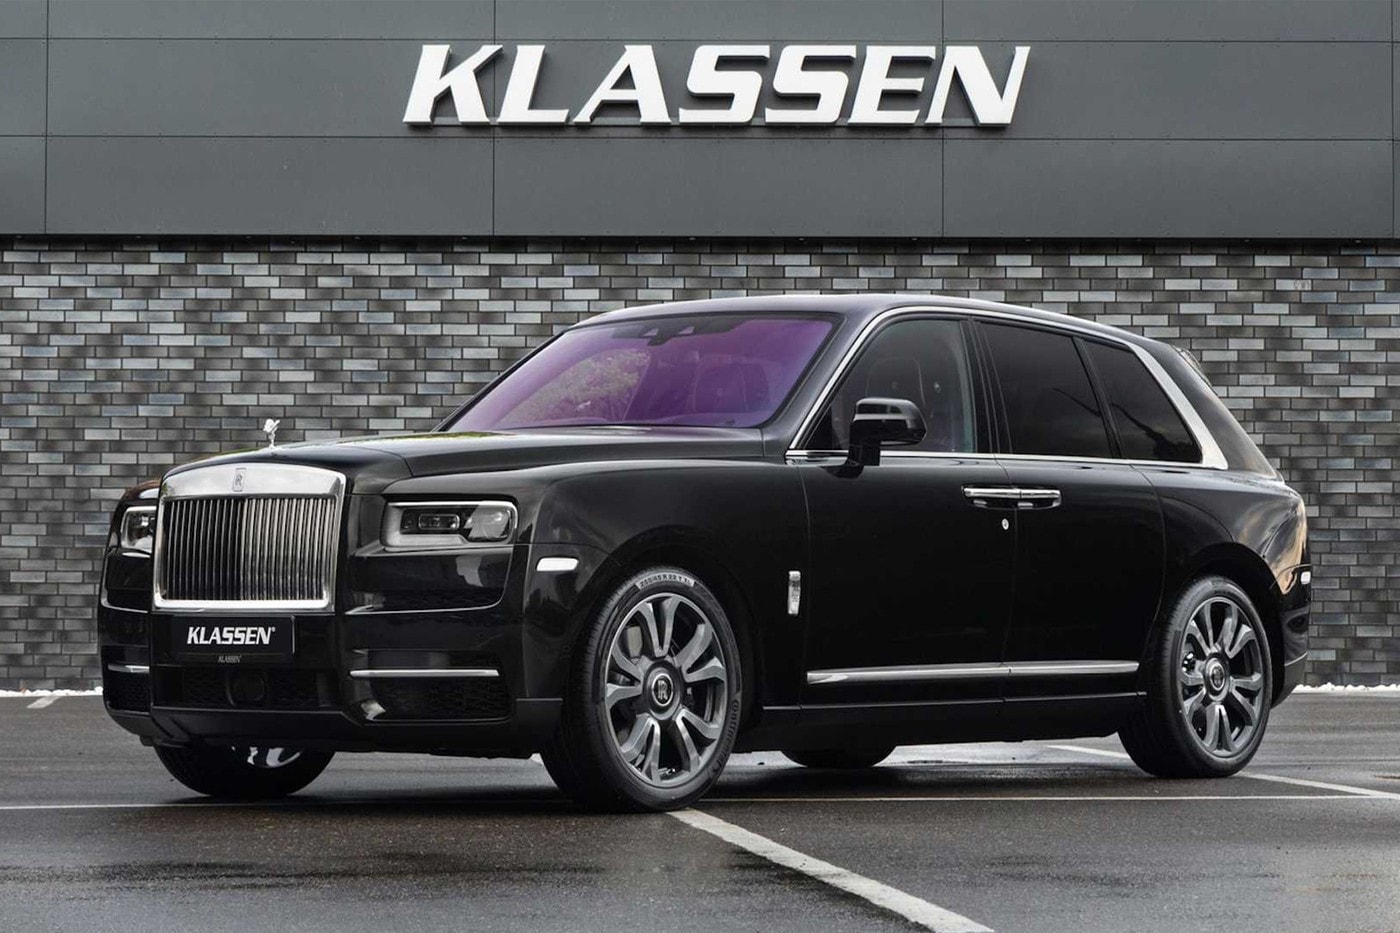 The Rolls-Royce Cullinan: Meet the world's most expensive SUV